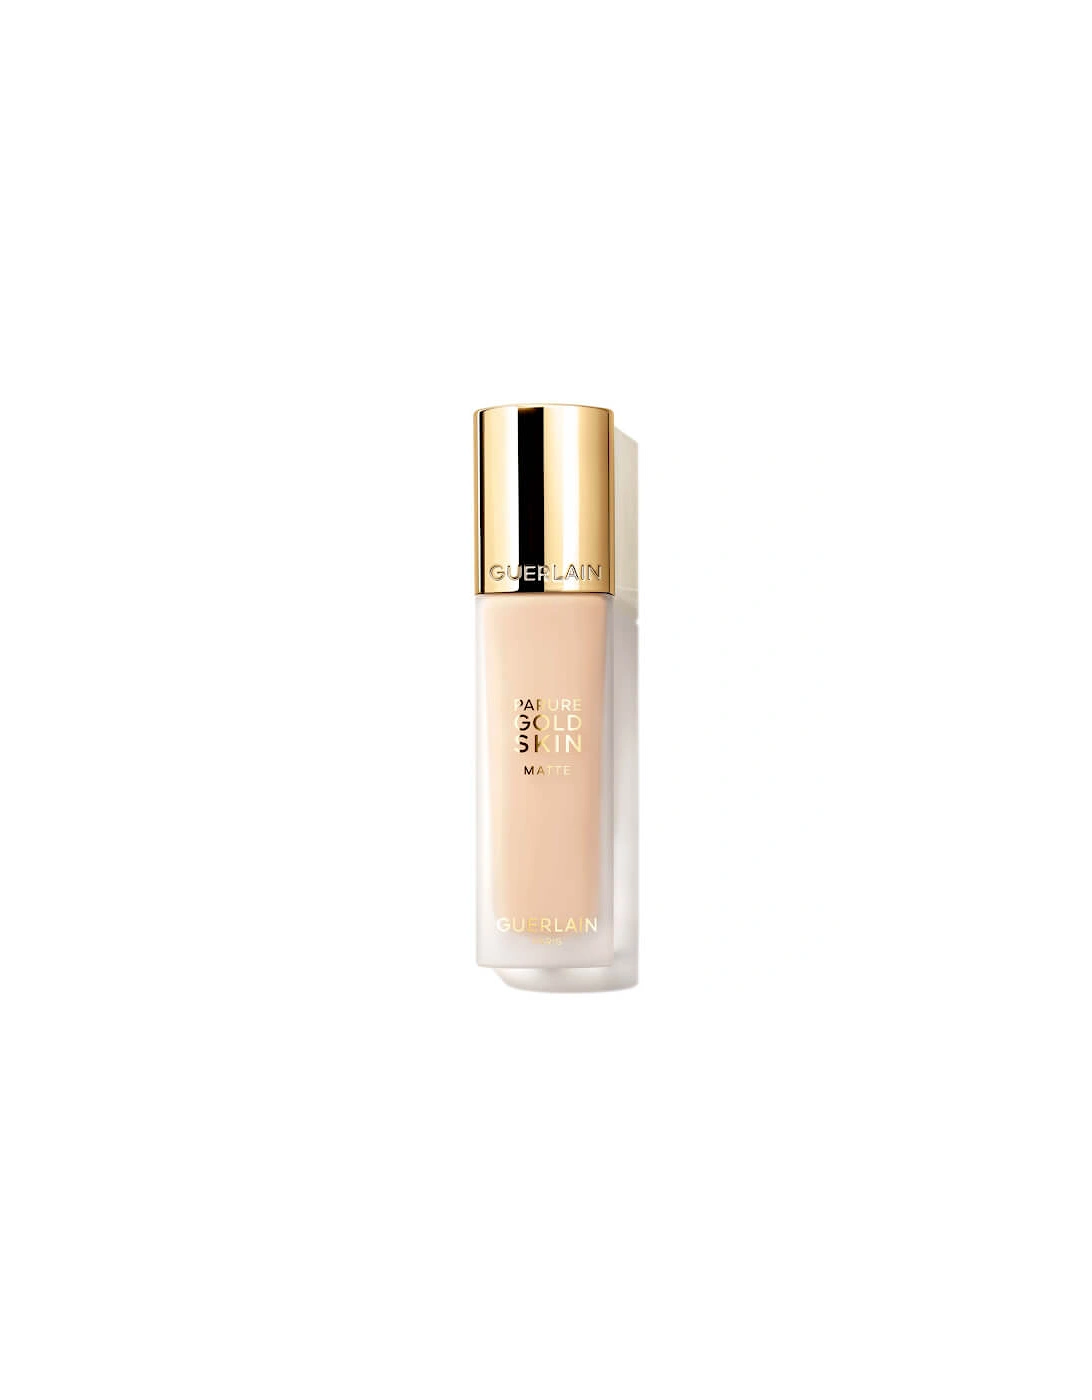 Parure Gold Skin 24H No-Transfer High Perfection Foundation - 2W Warm / Doré, 2 of 1